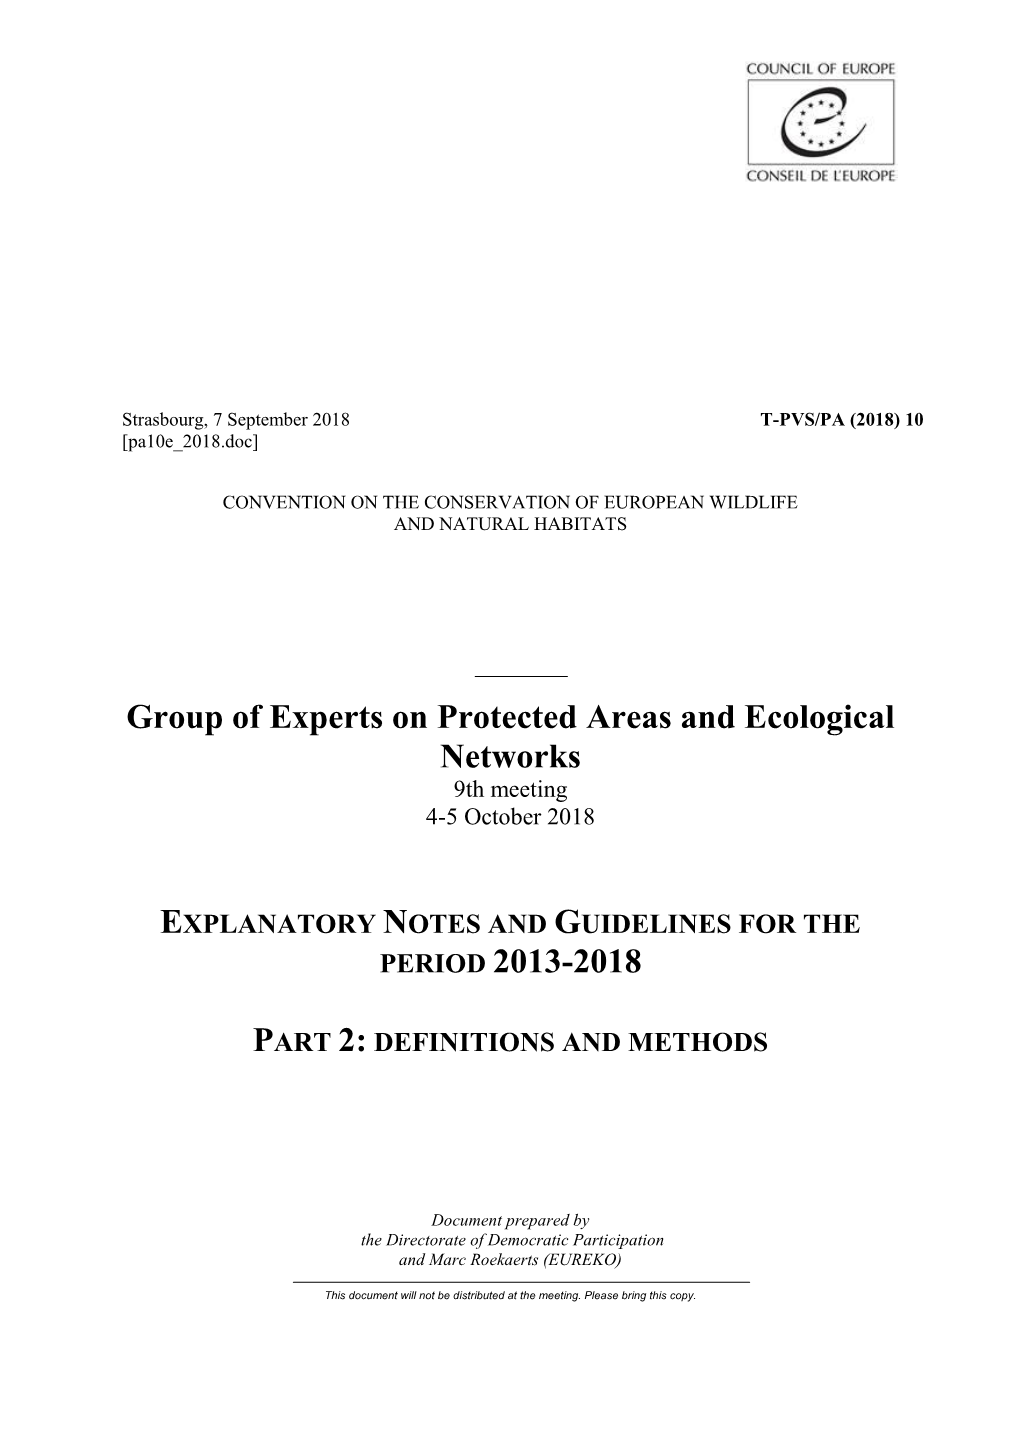 Group of Experts on Protected Areas and Ecological Networks PERIOD